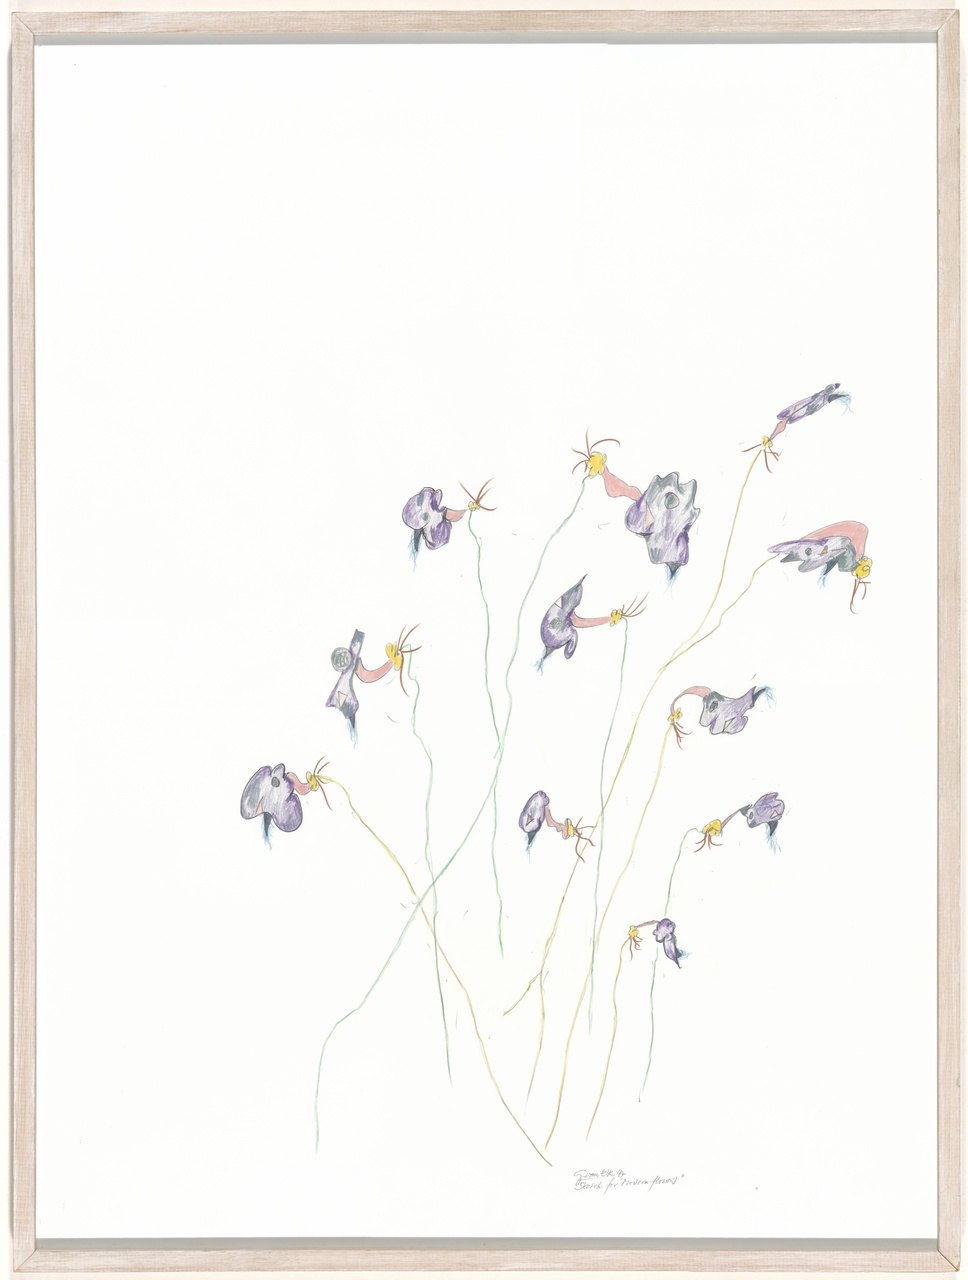 Sketch for modern flowers no. 1